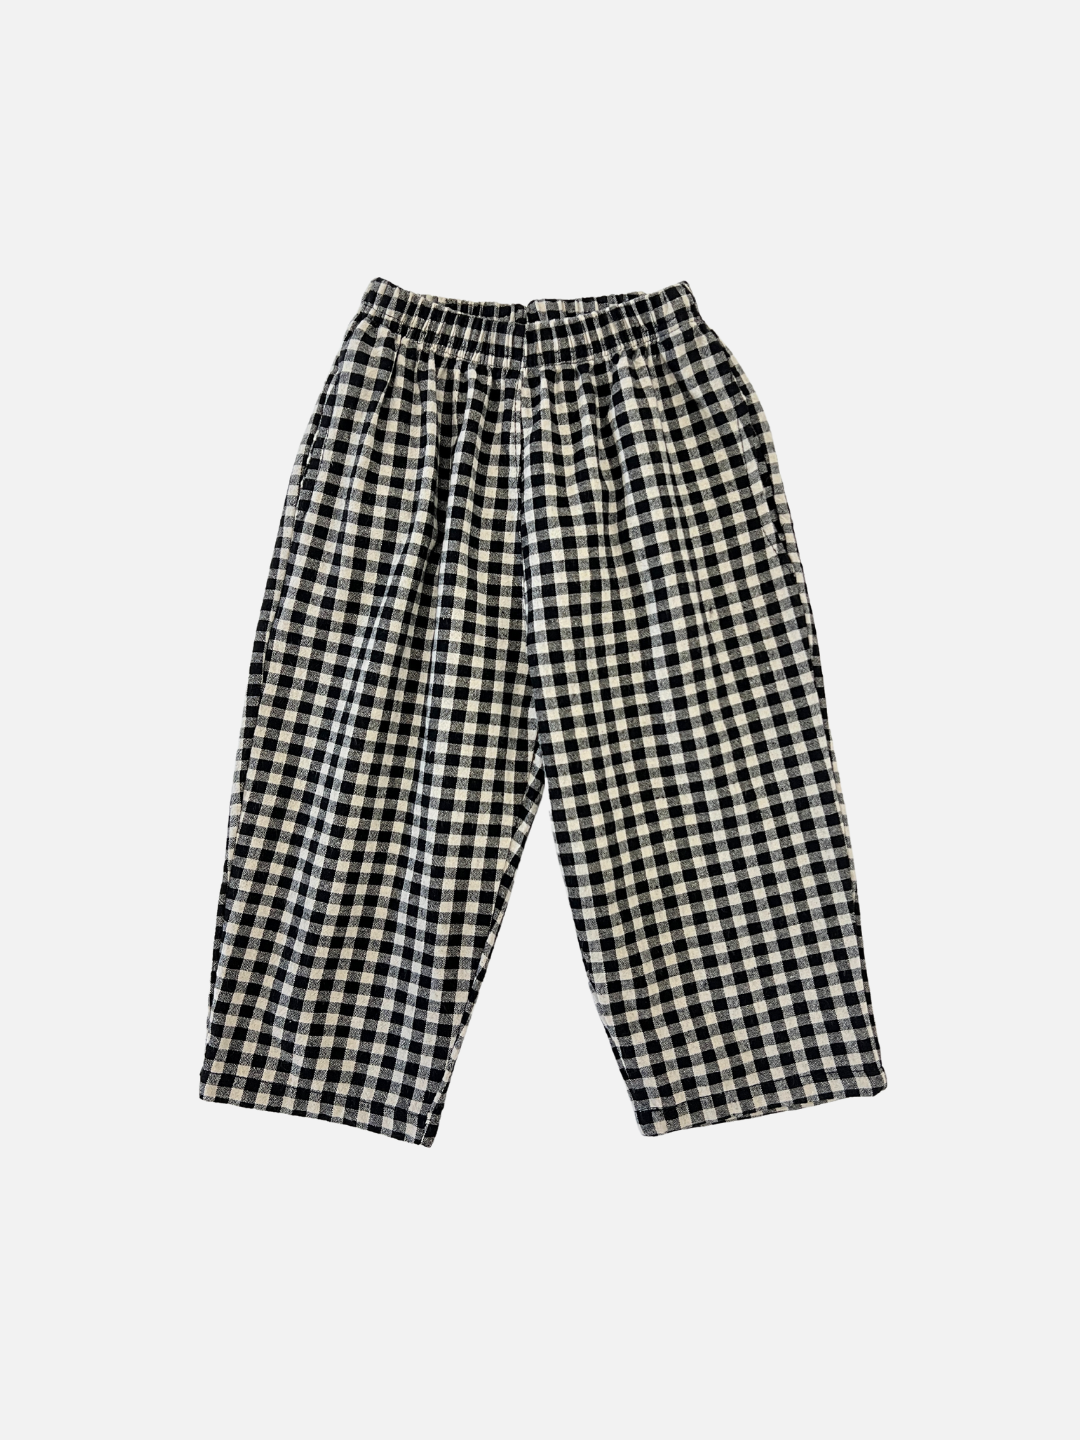 Front view of kids black and off-white gingham check pants.